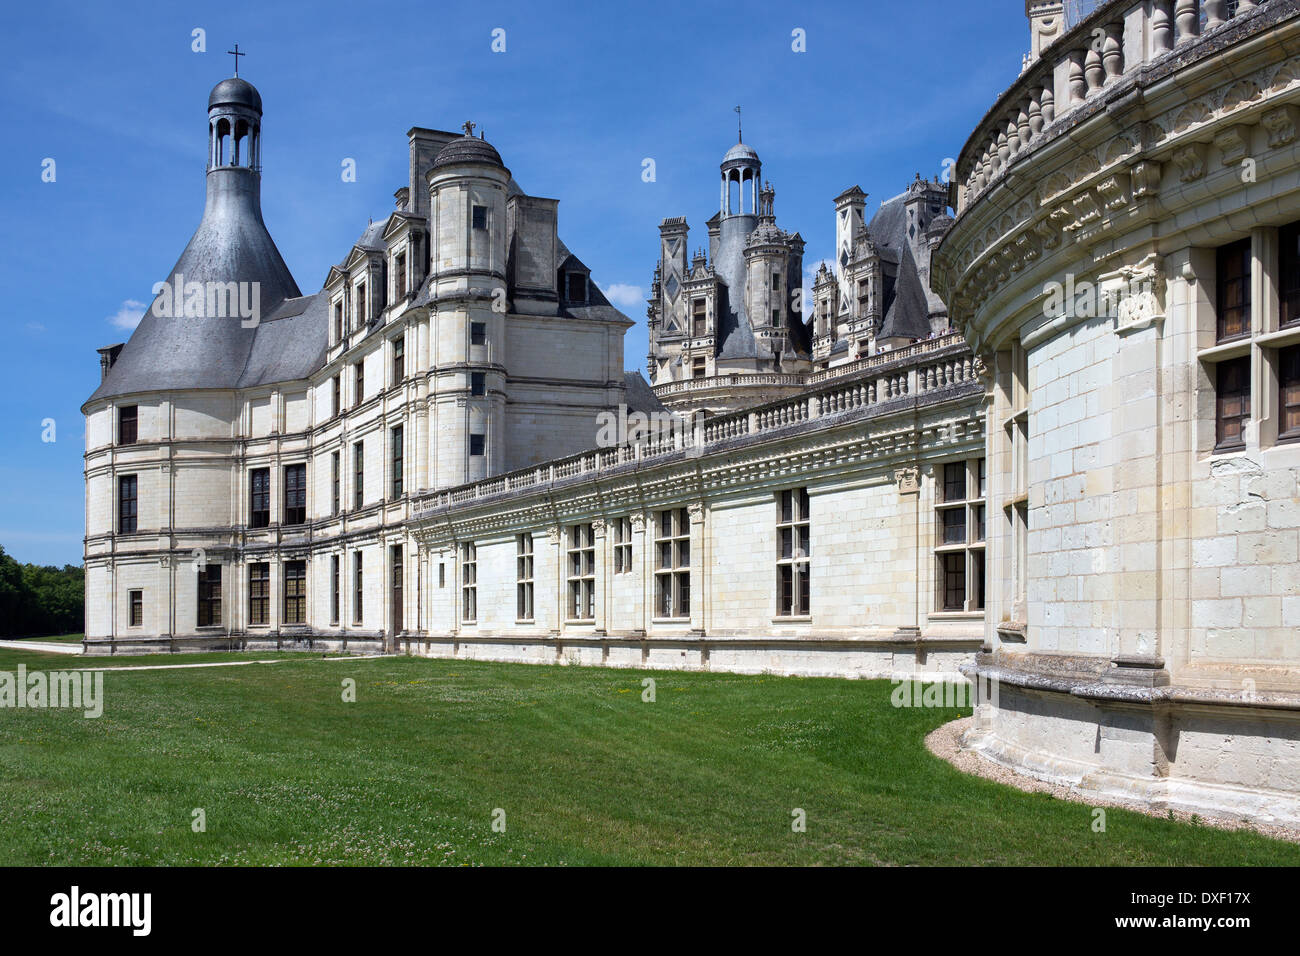 Chateau de Chambord - Loire Valley in France Stock Photo